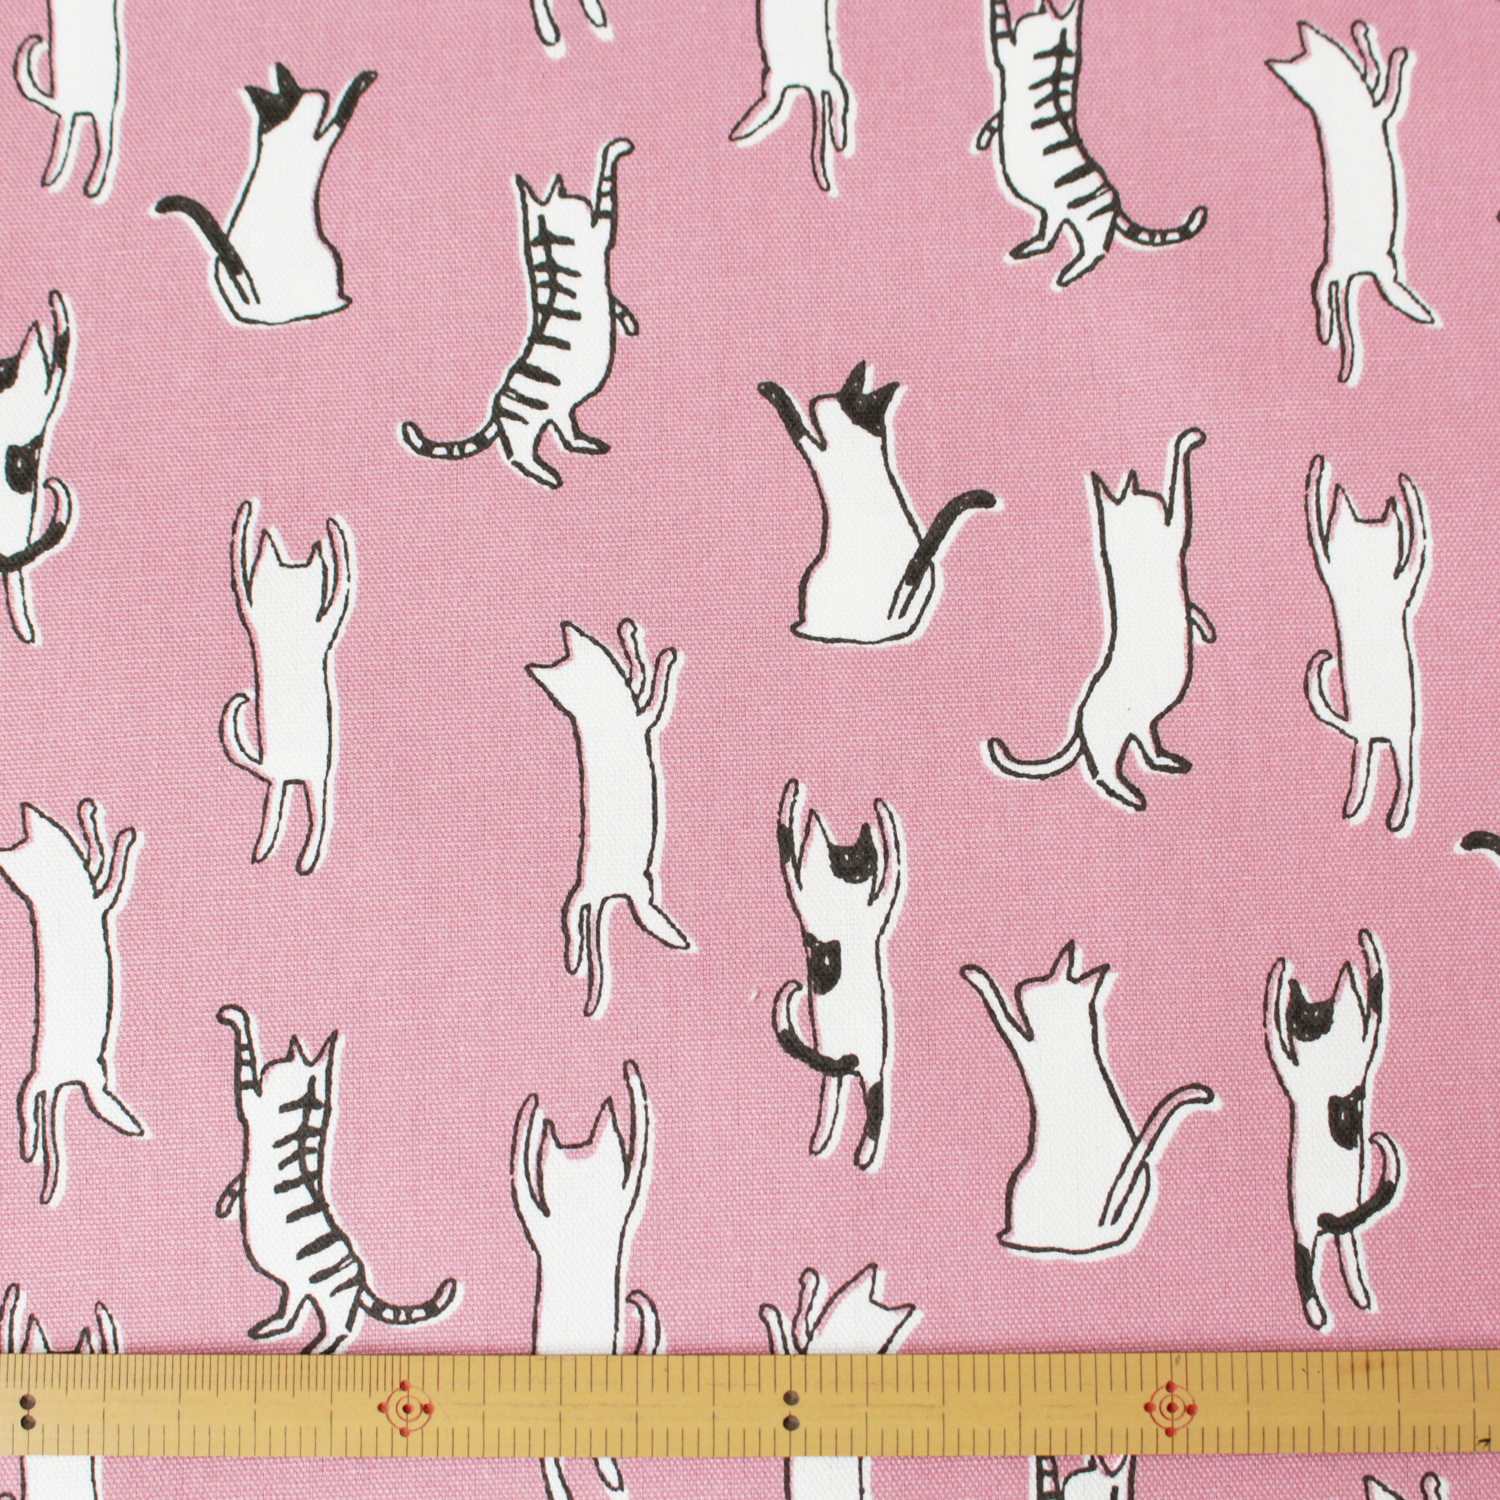 [Only on Online Shop]■7098-2B Cotton OX Fabric cat pink width 110cm （roll）